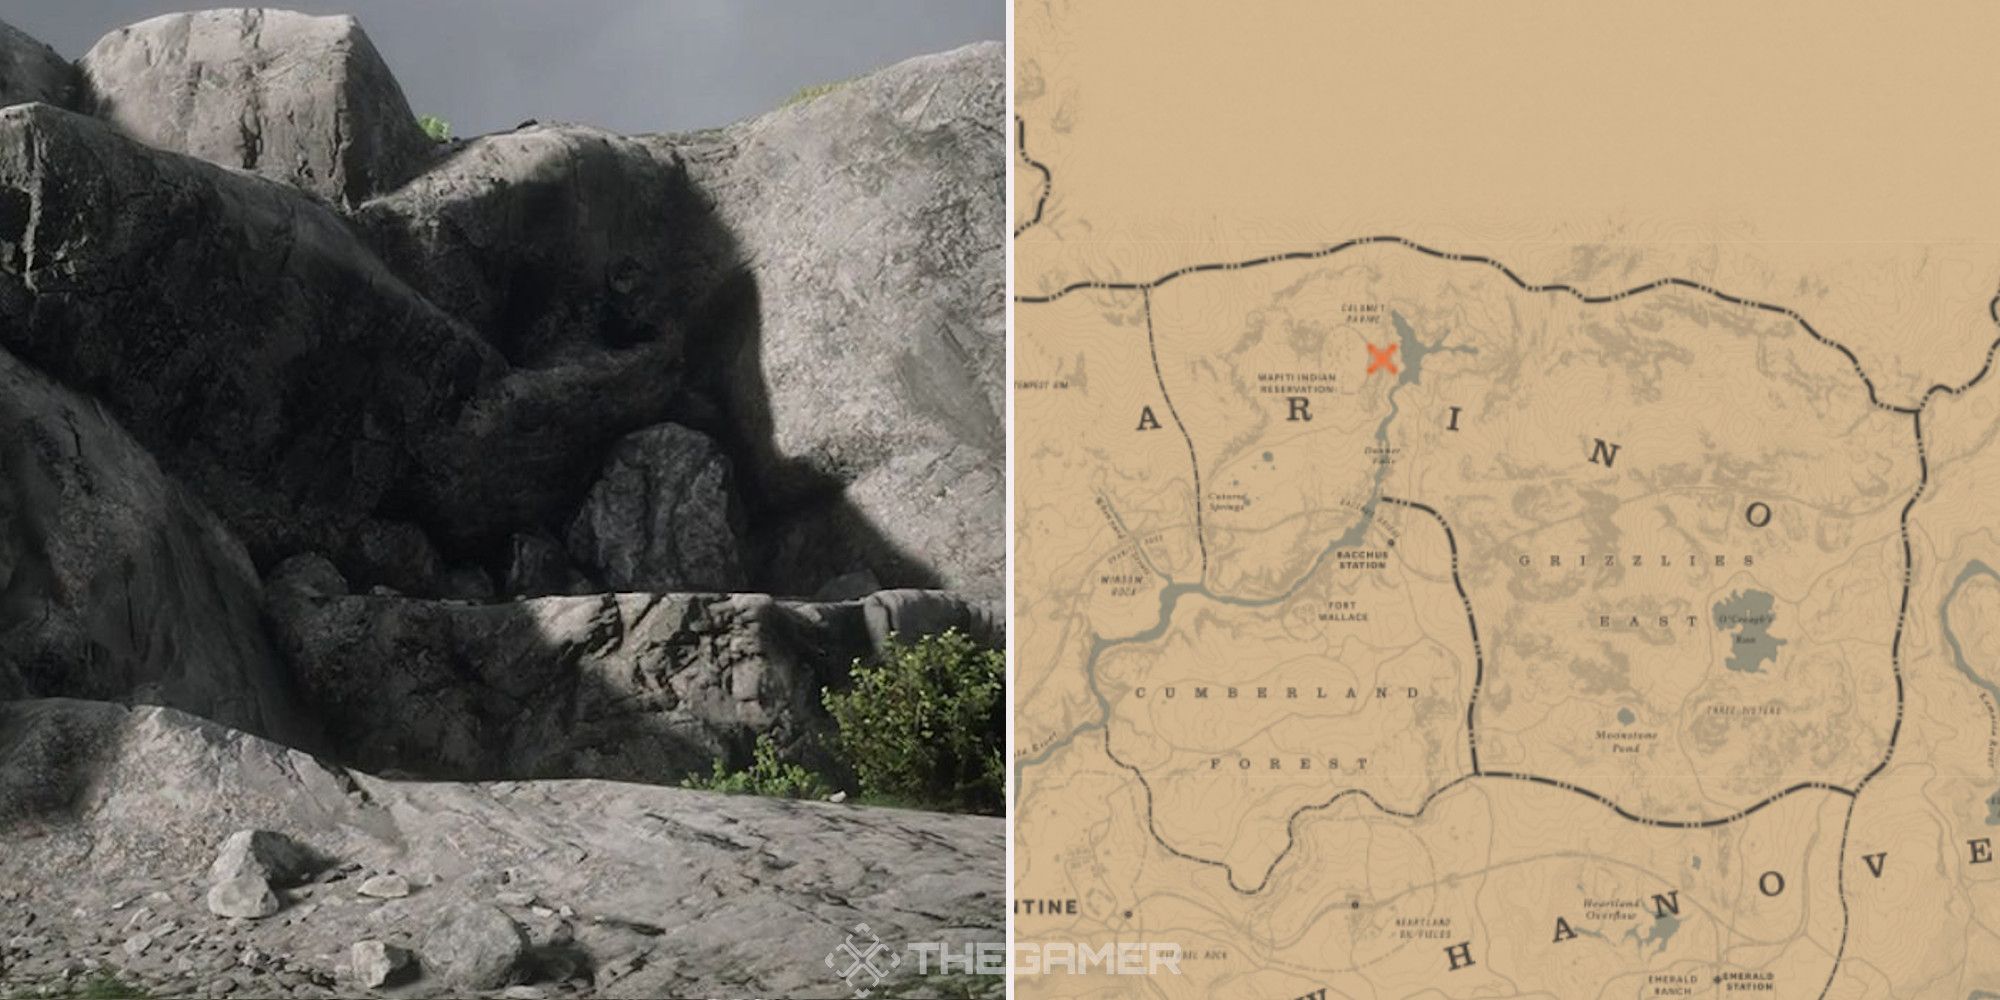 A rock cave in Red Dead Redemption 2, next to an image of where it can be found marked on the map.